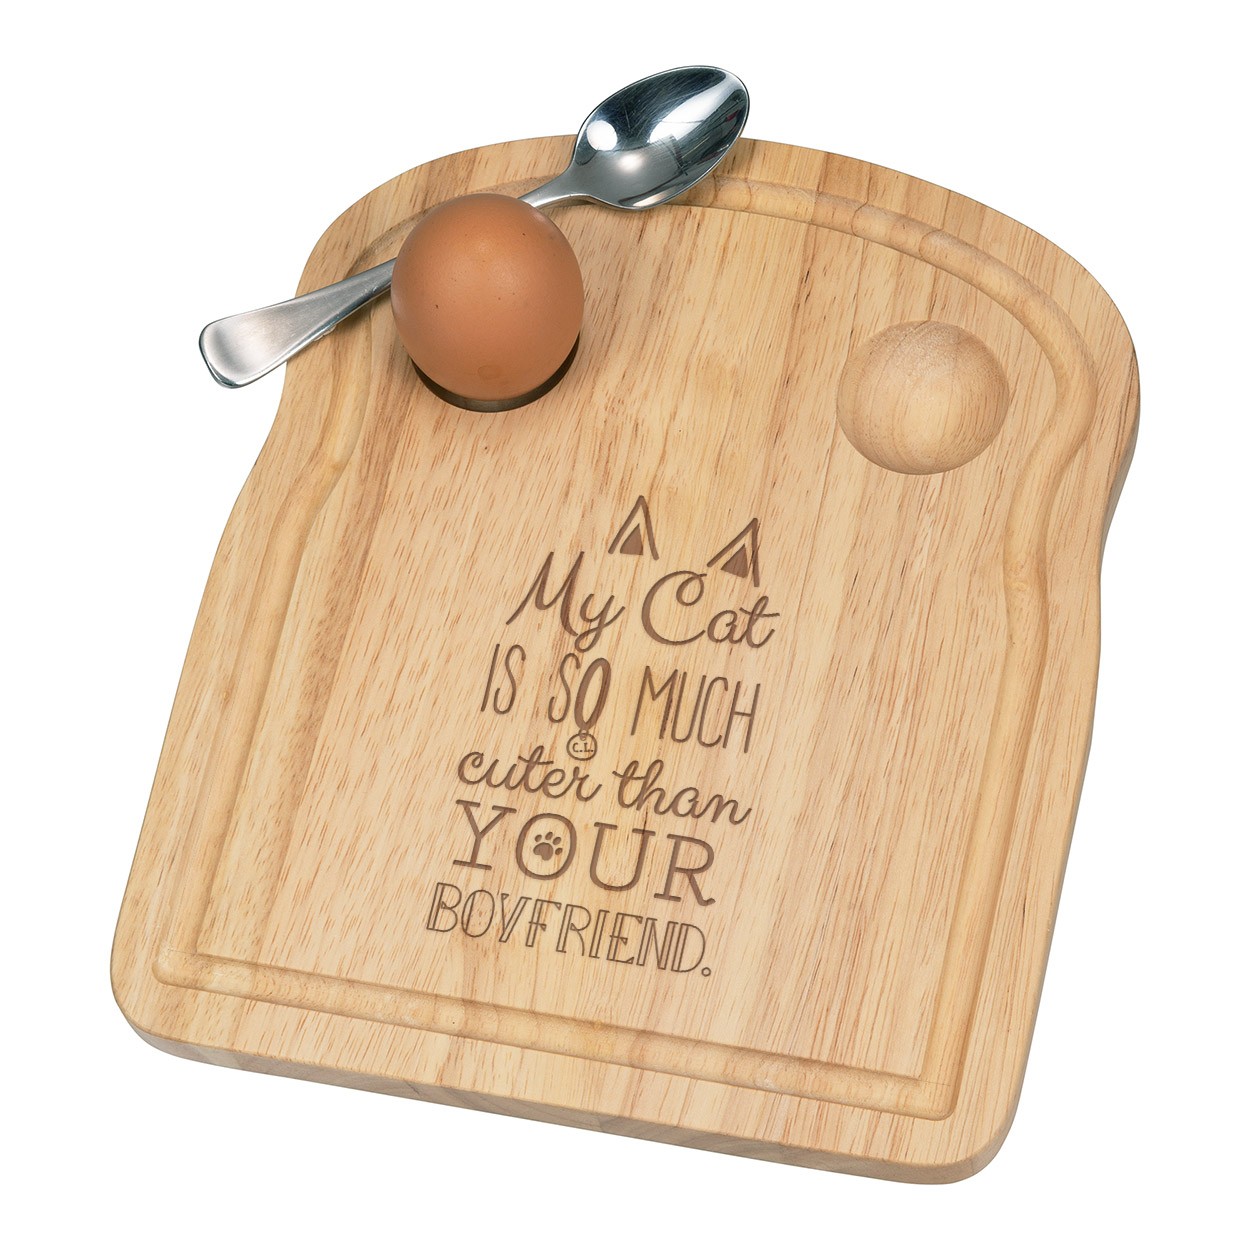 My Cat Is So Much Cuter Than Your Boyfriend Breakfast Dippy Egg Cup Board Wooden